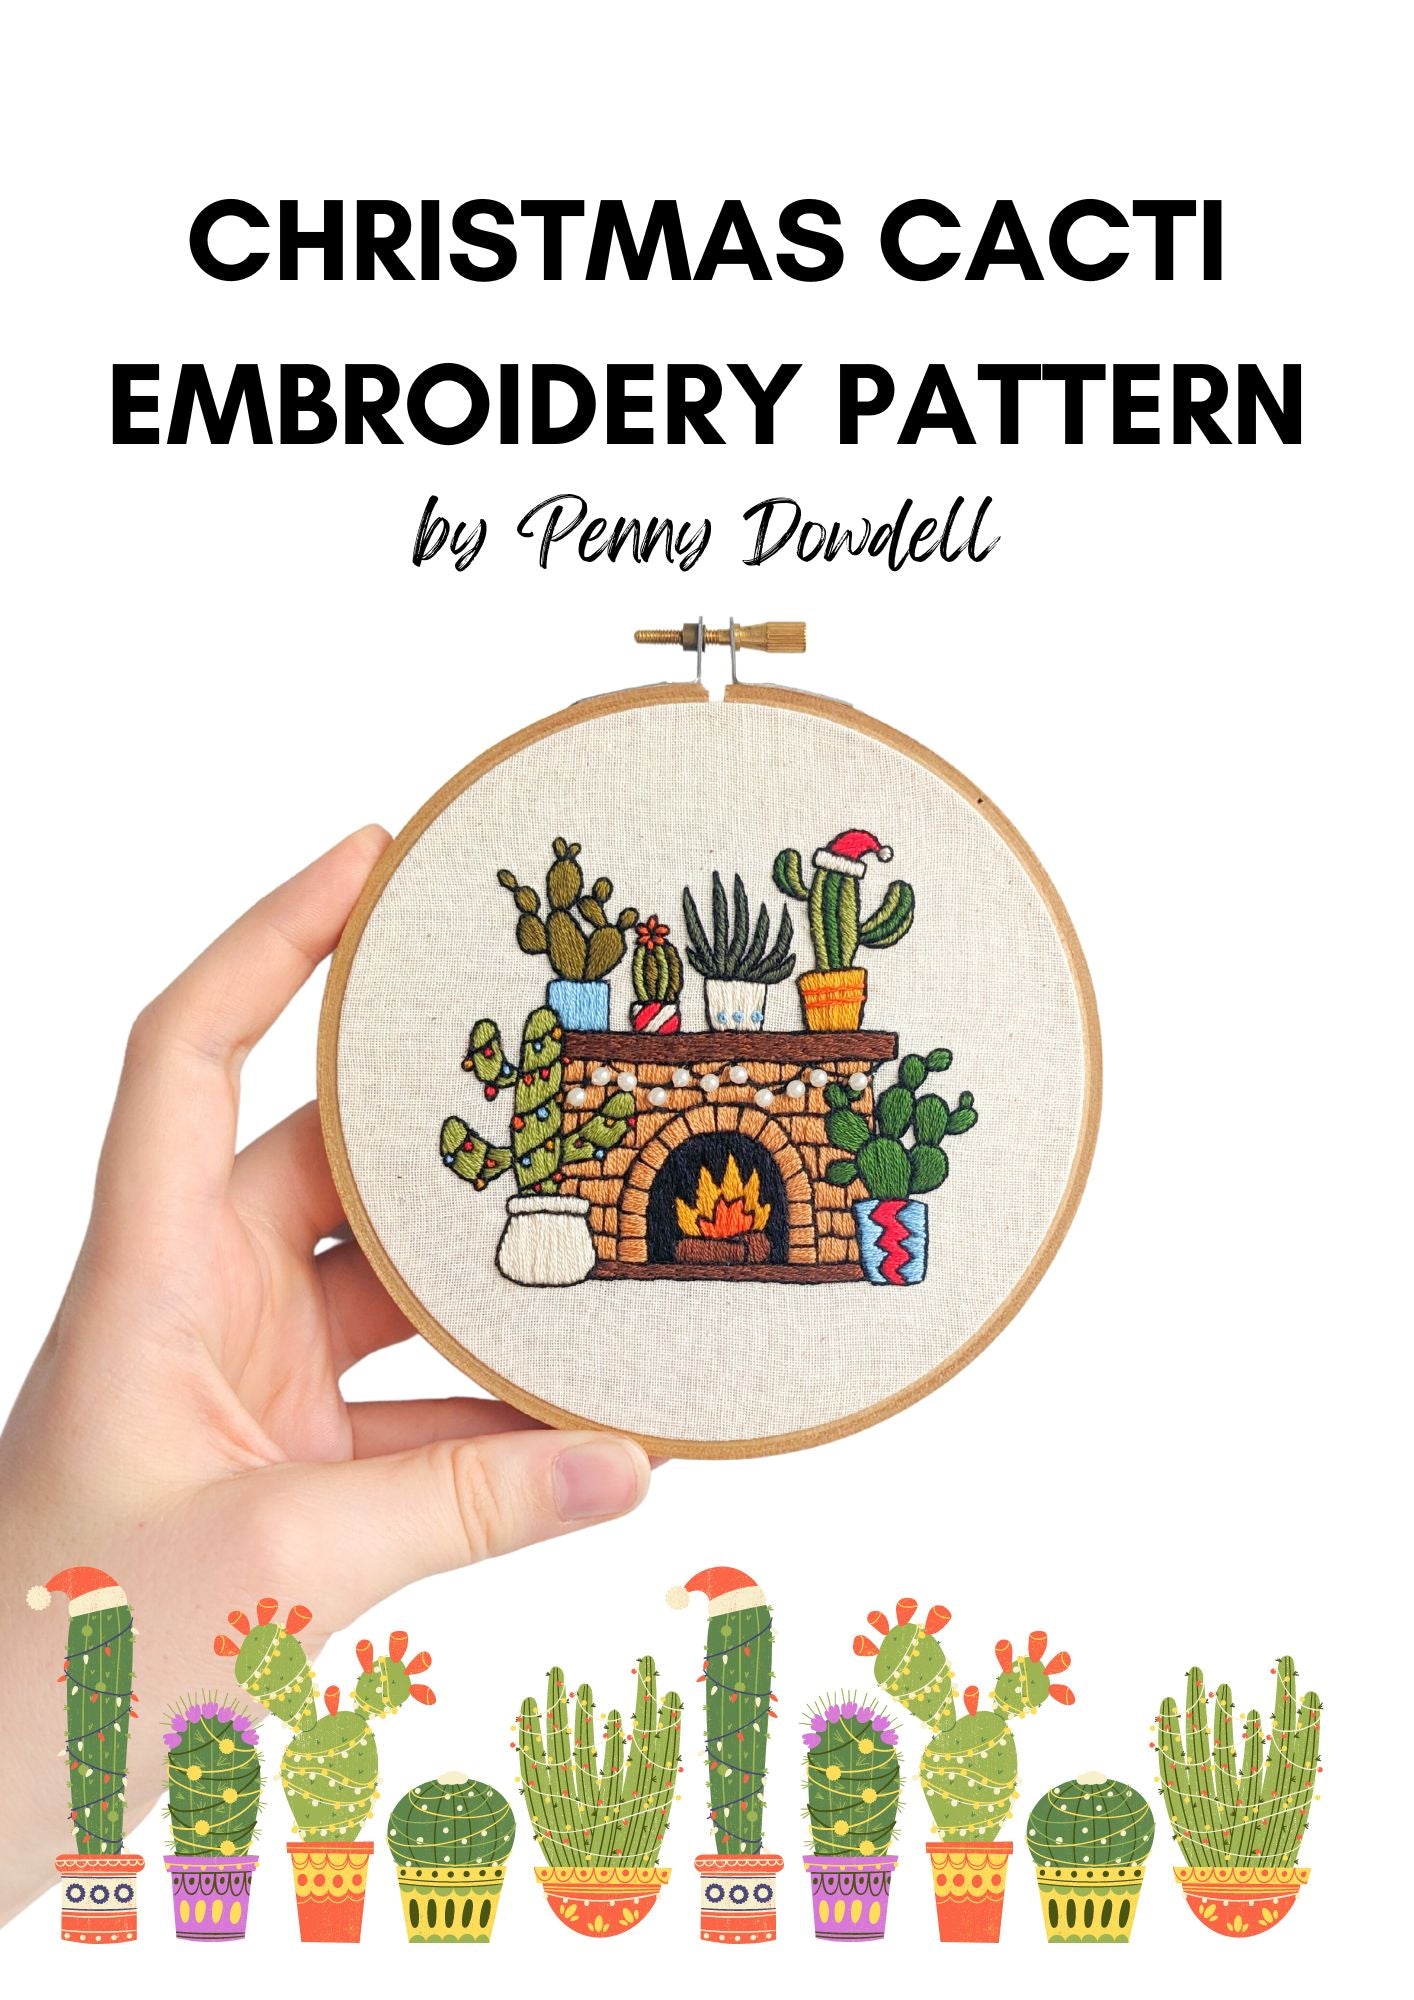 Christmas Cacti Embroidery PDF PATTERN DOWNLOAD